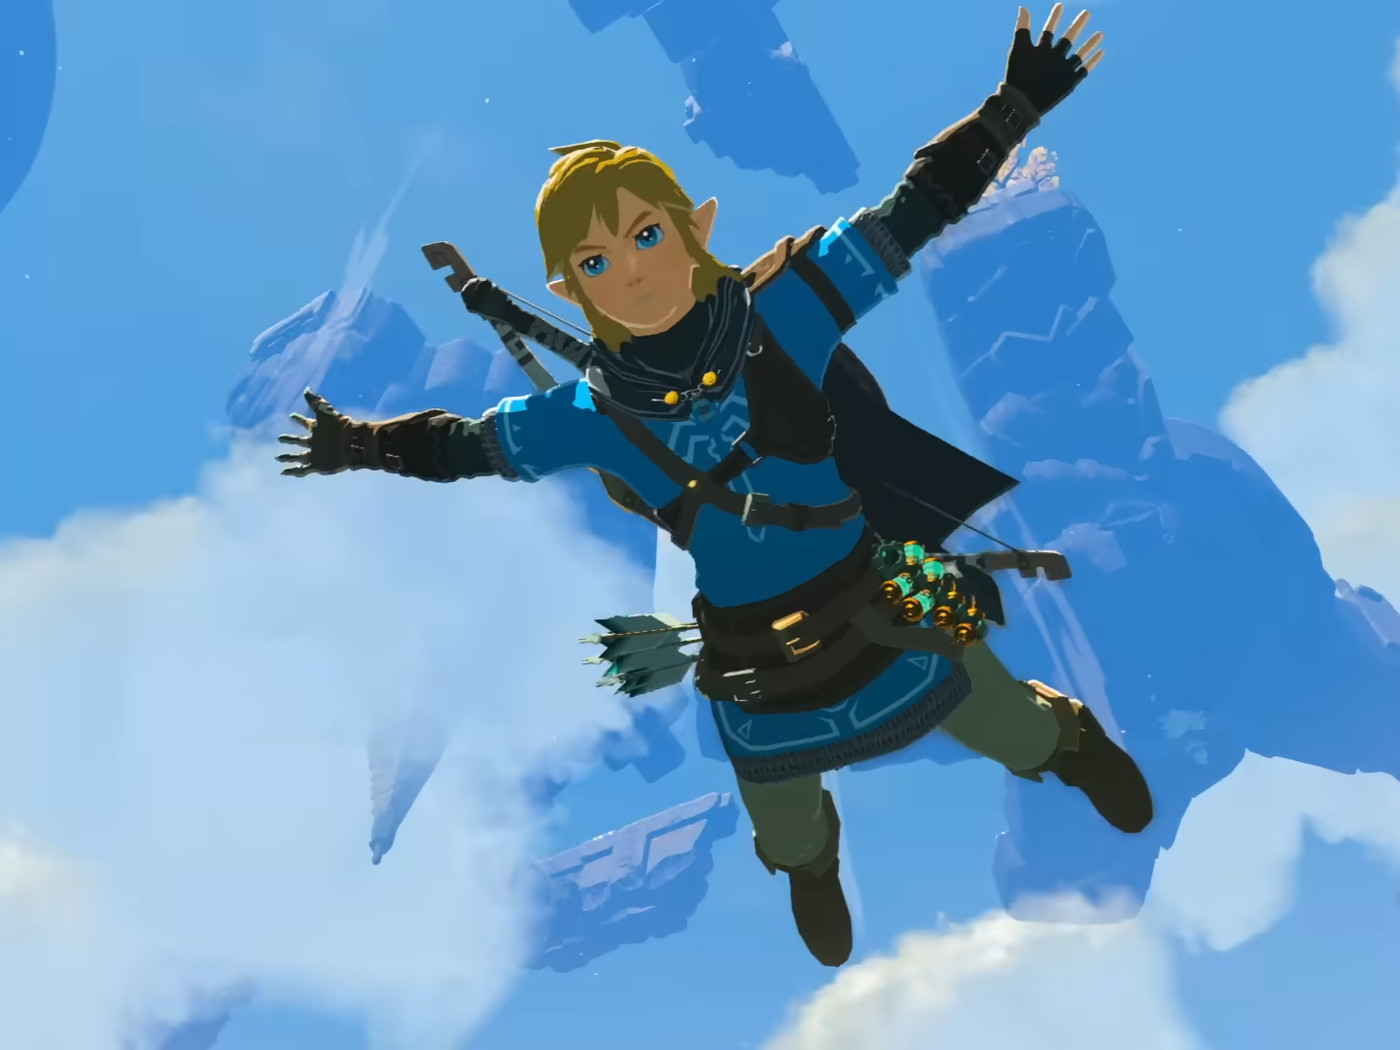 Perfecting the Blueprint - The Legend of Zelda: Tears of the Kingdom Review